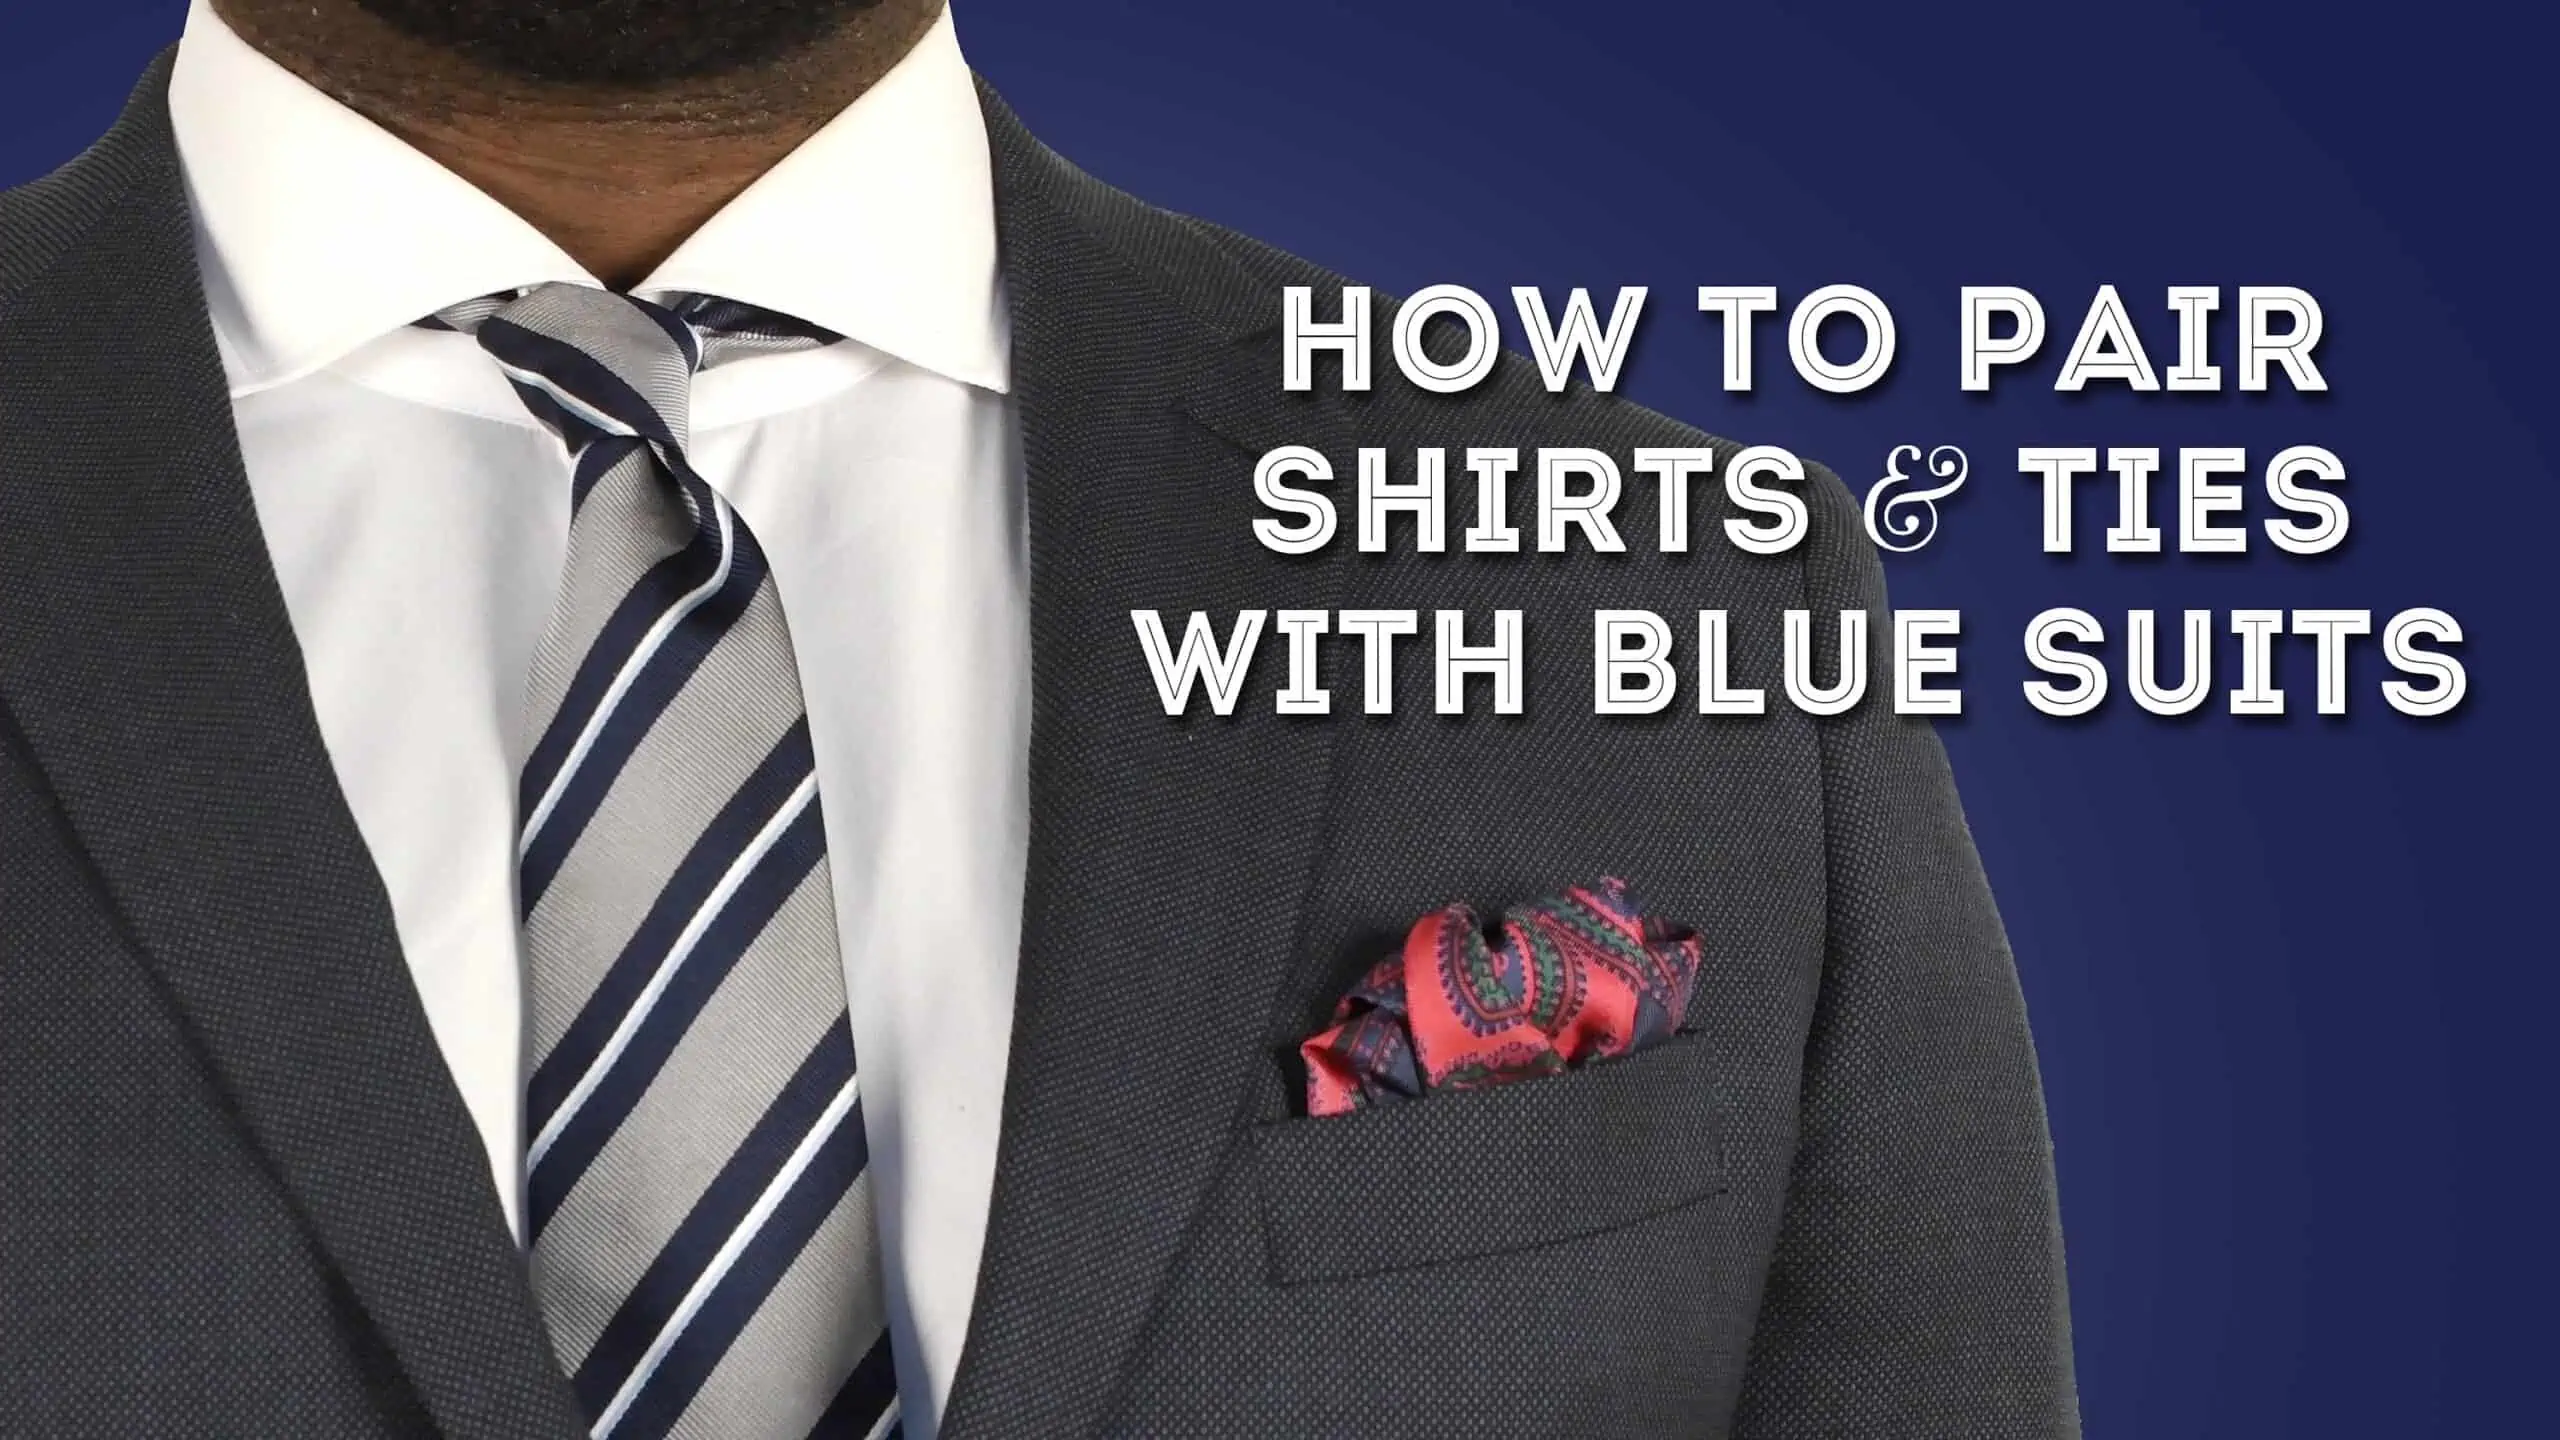 https://www.gentlemansgazette.com/wp-content/uploads/2019/10/how-to-pair-with-blue-suits_3840x2160-scaled.webp